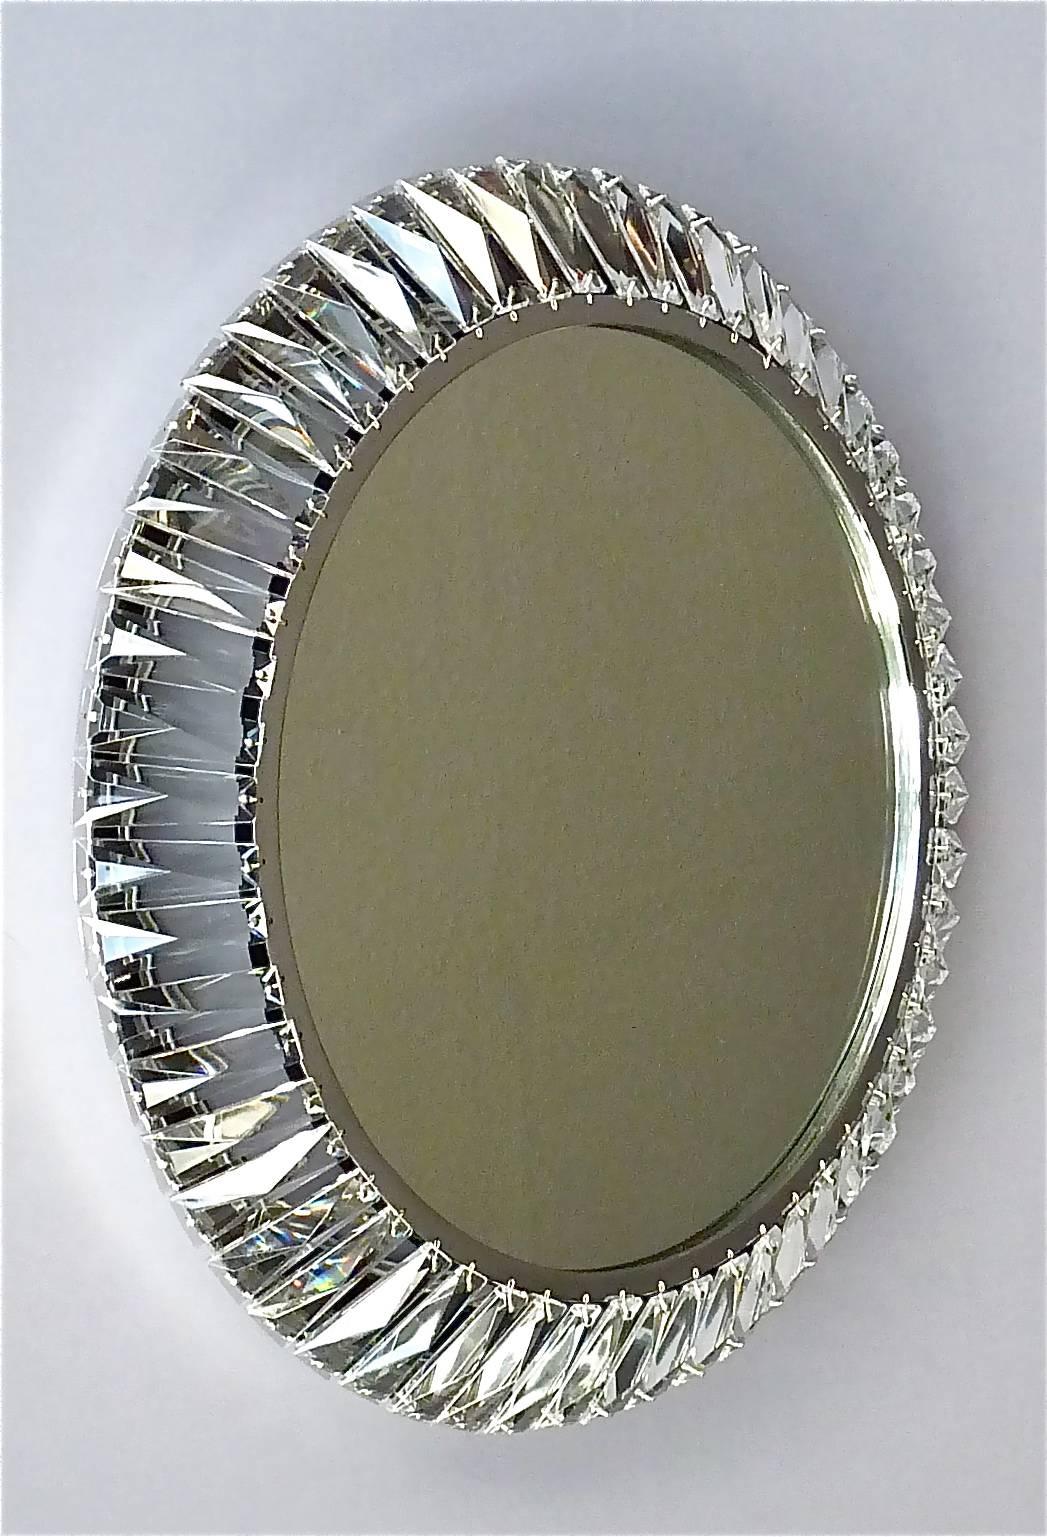 Round signed chrome brass metal faceted crystal glass backlit wall mirror made by Palwa, Germany, circa 1960-1970, documented in the Palwa sales catalog. The frame has lots of beautiful hand-cut faceted and polished crystals in the shape of a